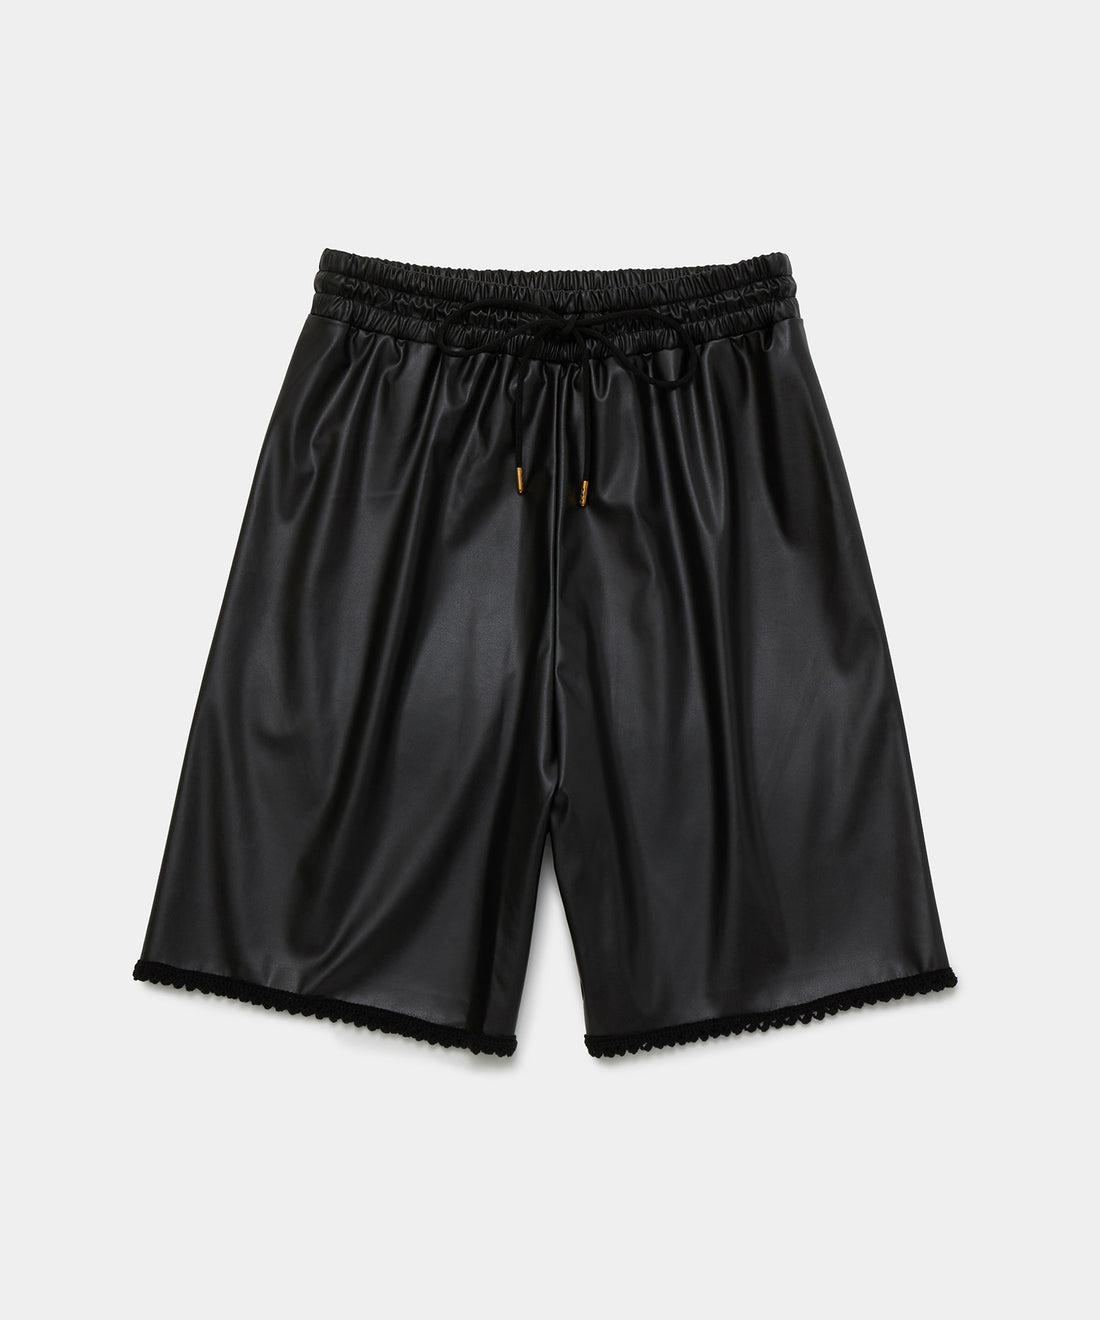 Synthetic Leather Short Pants W/crochet trimming